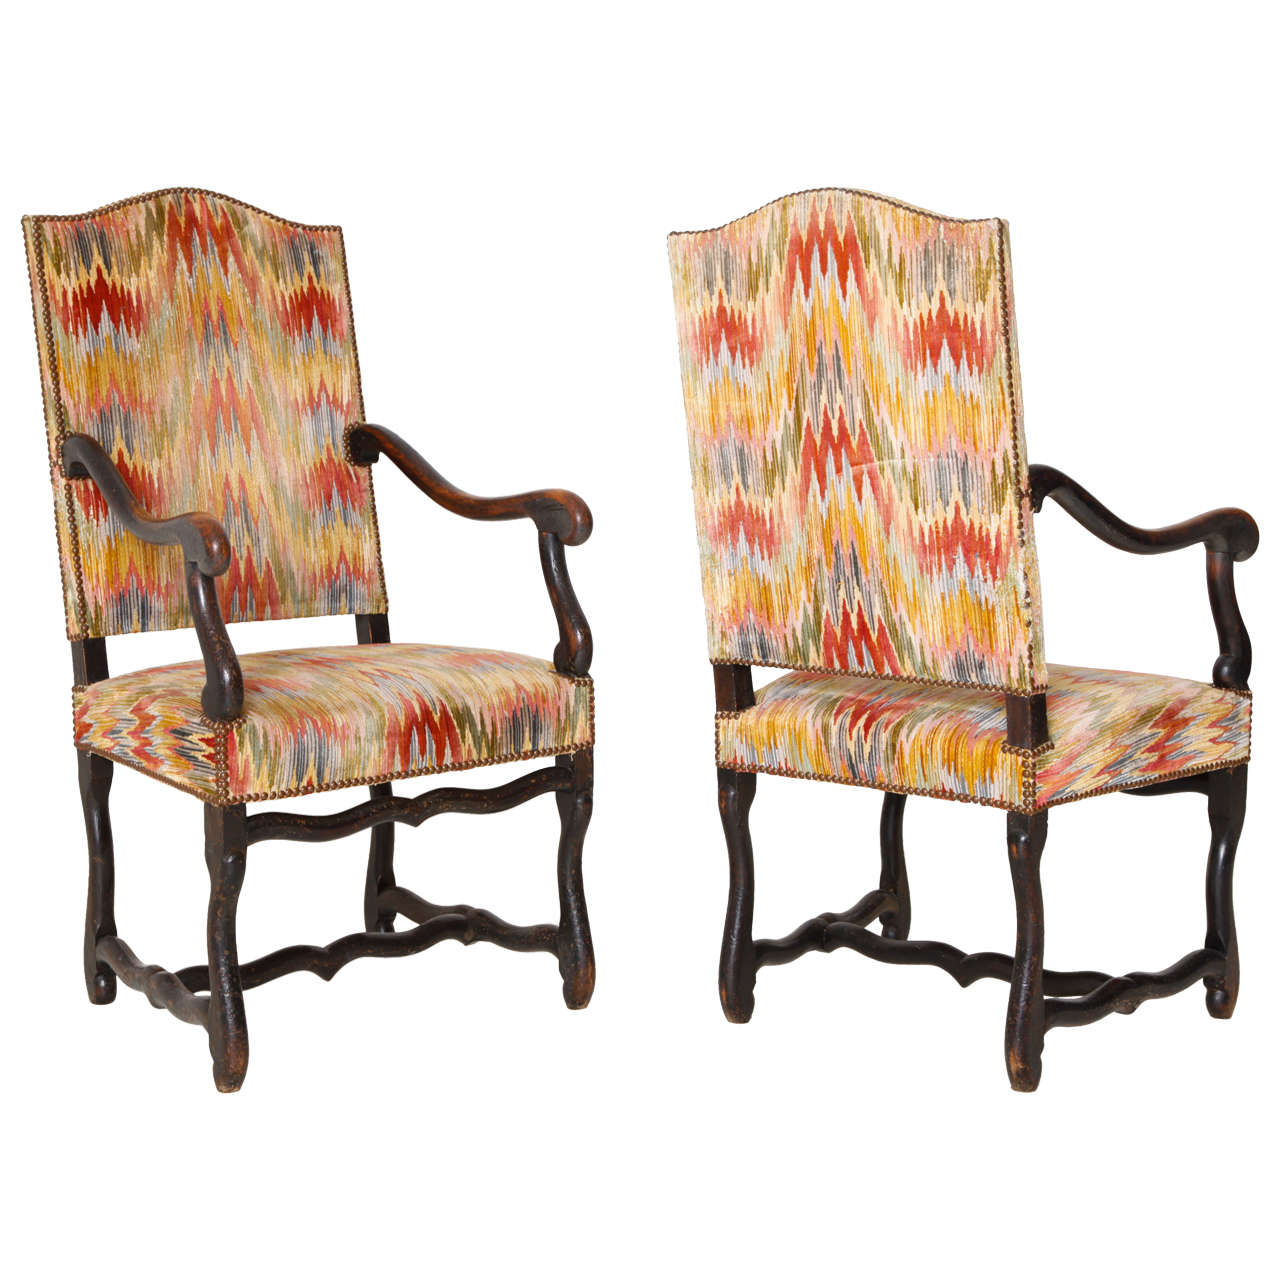 Pair of 19th Century Black Painted Os de Mouton Chairs For Sale